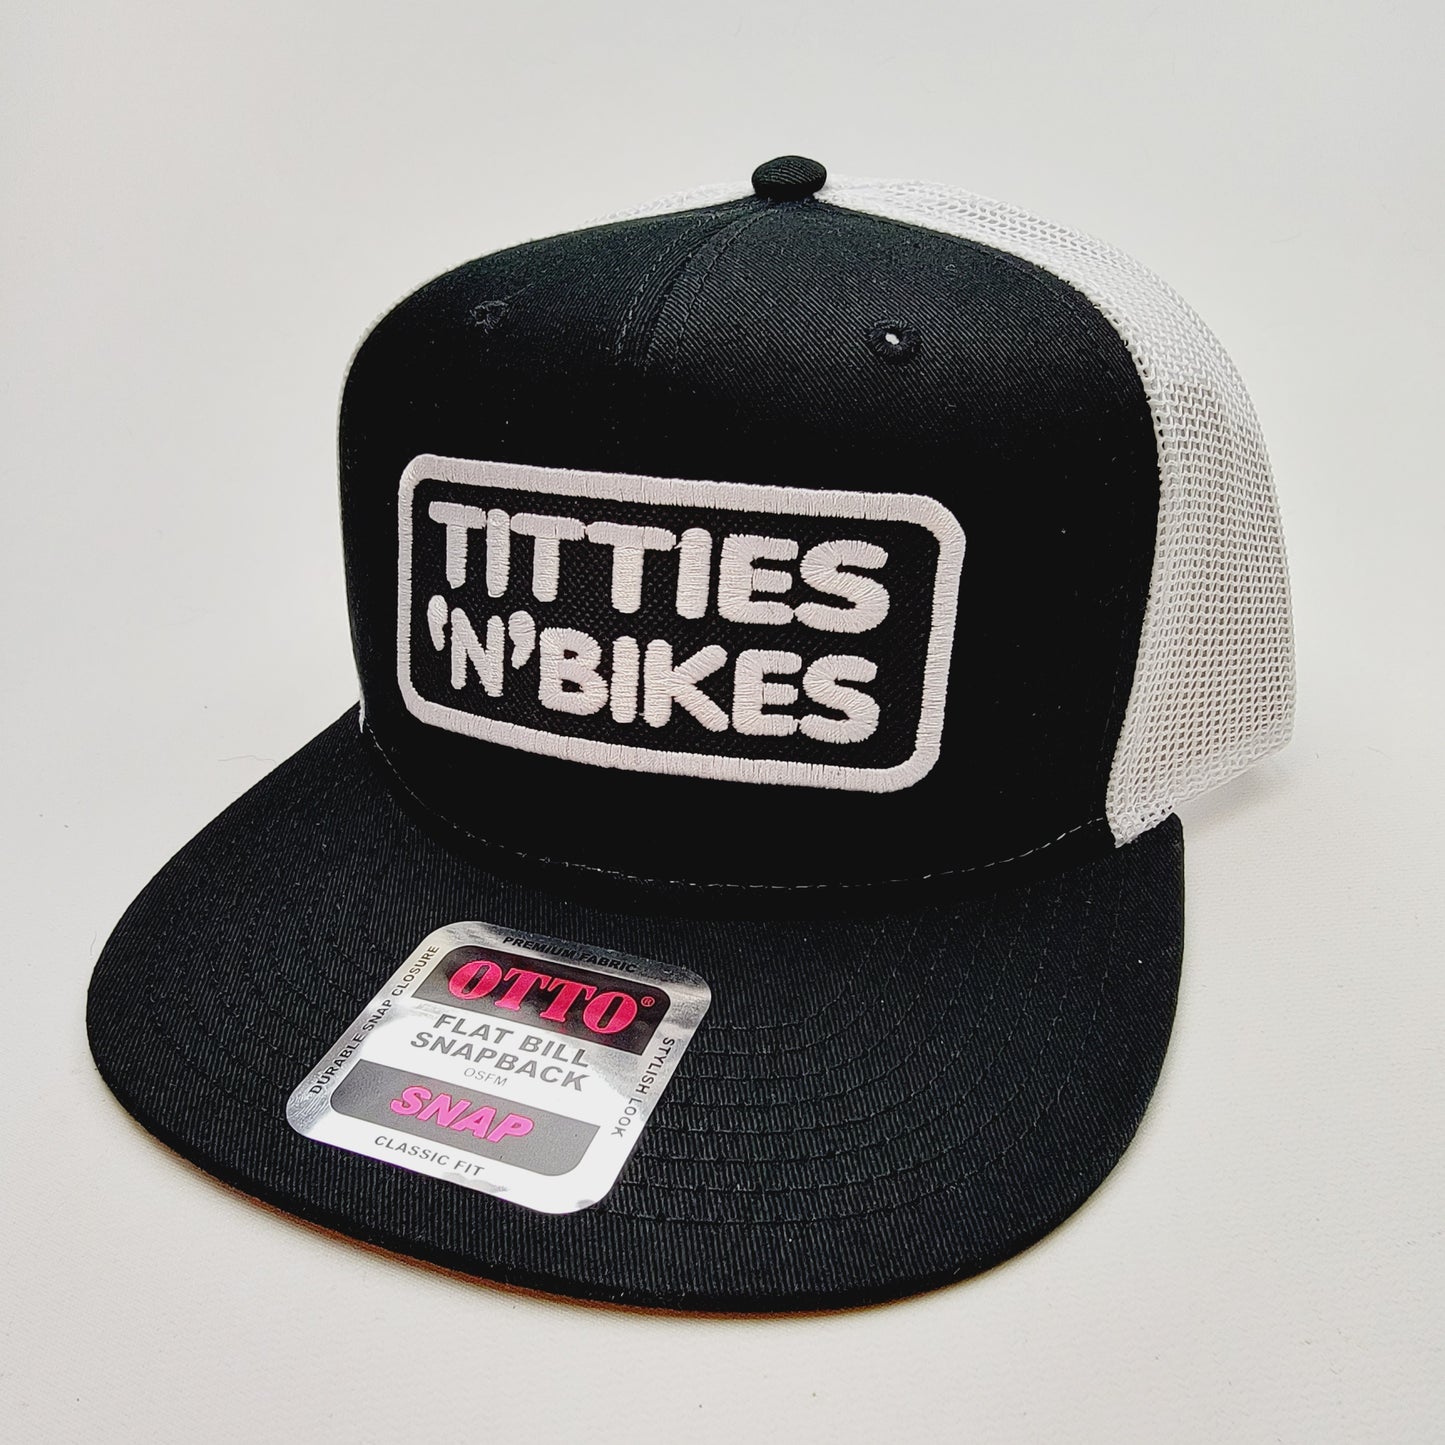 Titties N Bikes Embroidered Patch Hat Baseball Cap Adjustable Black/White